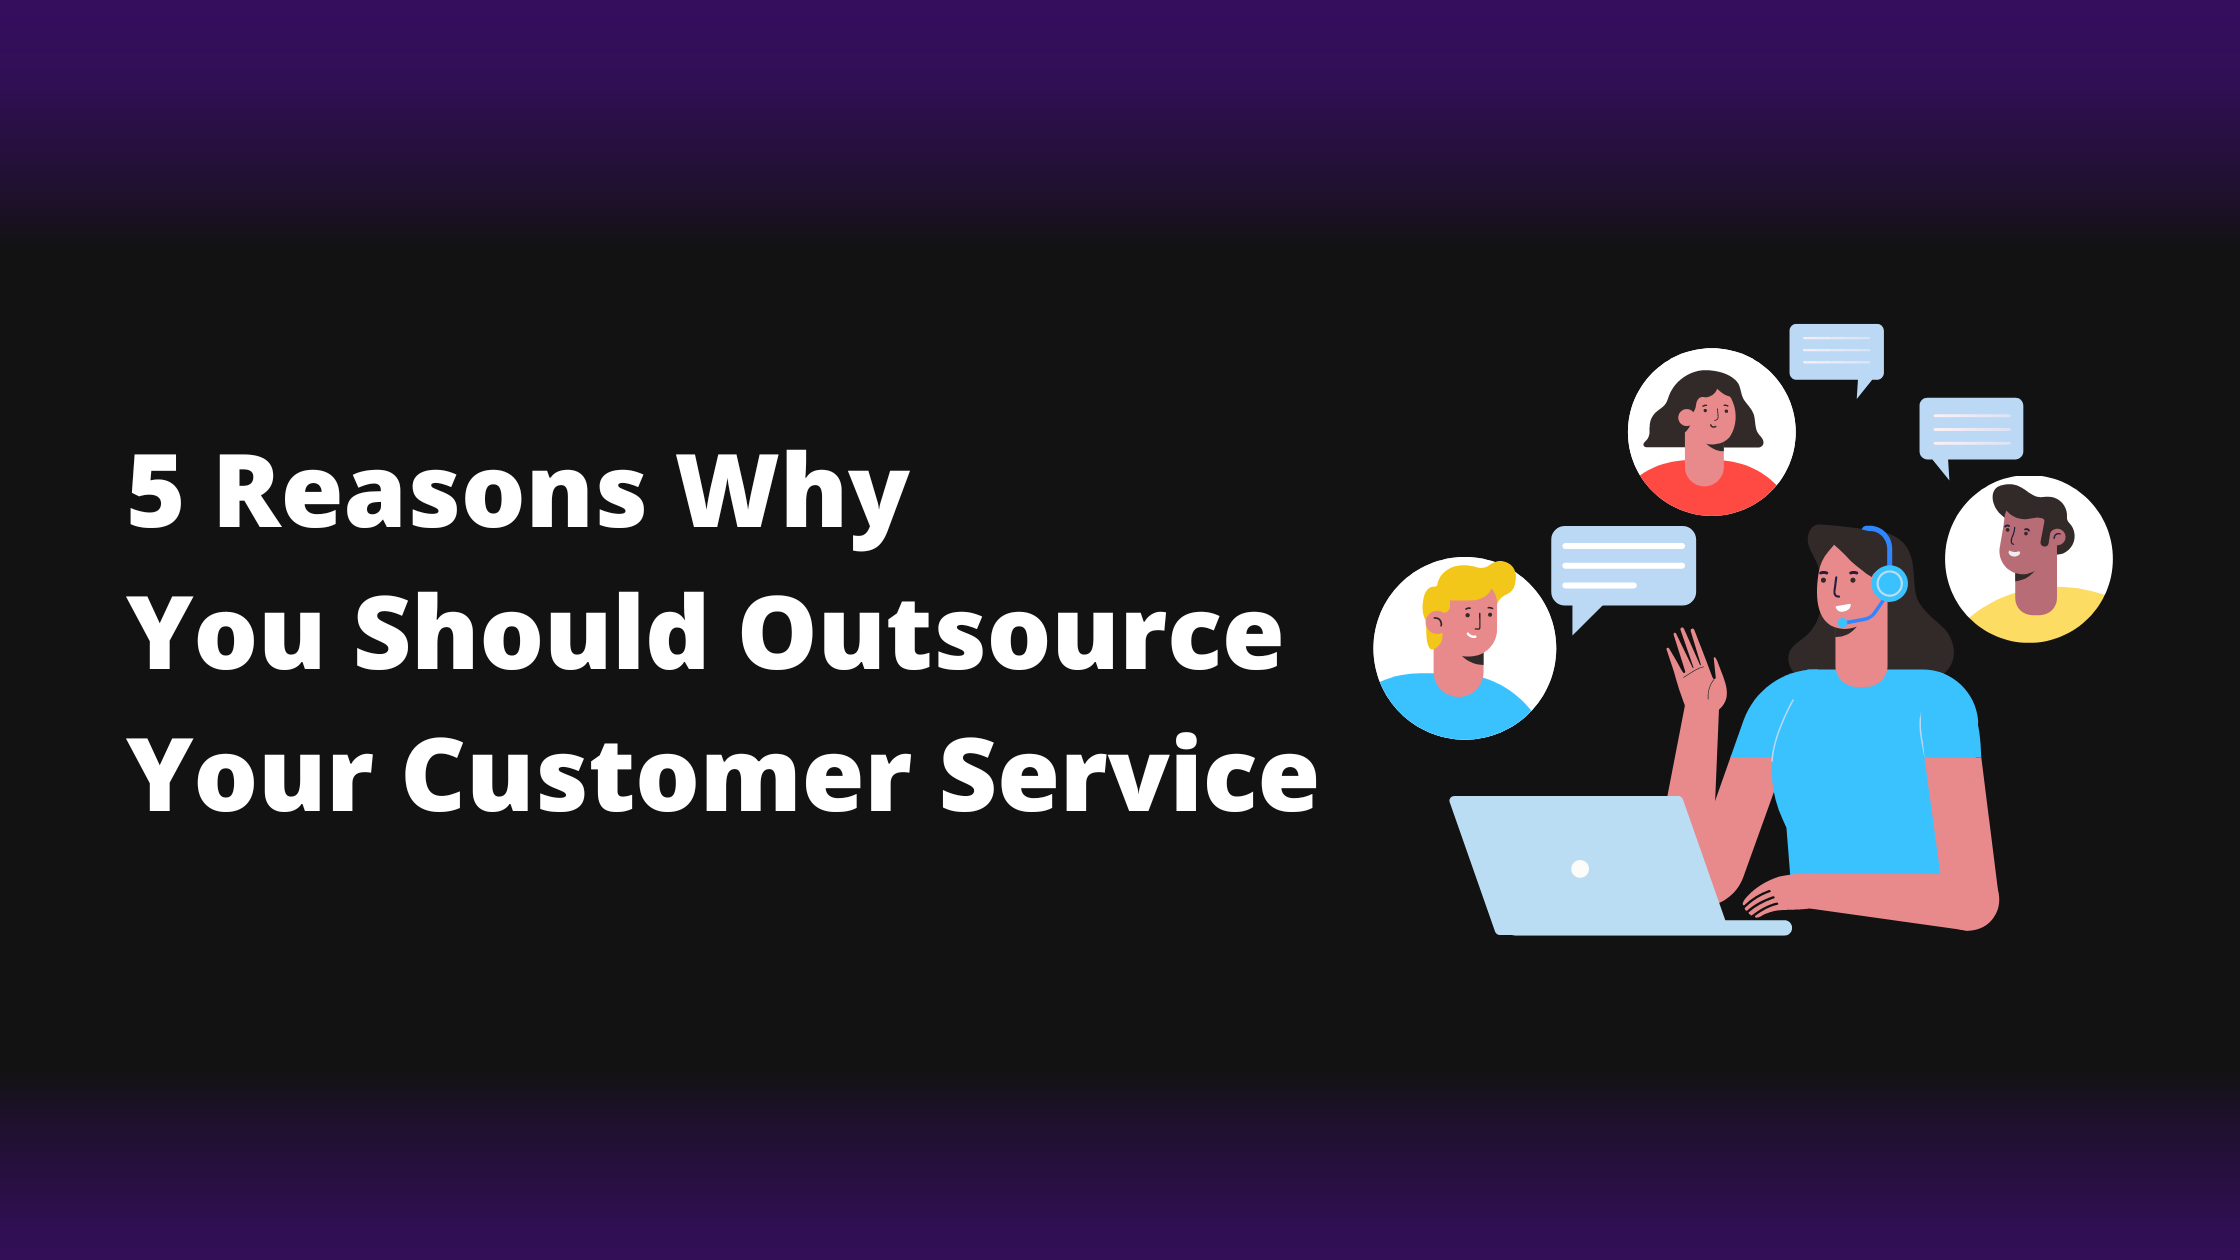 5 Reasons Why It Could Be a Smart Move to Outsource Your Customer Service